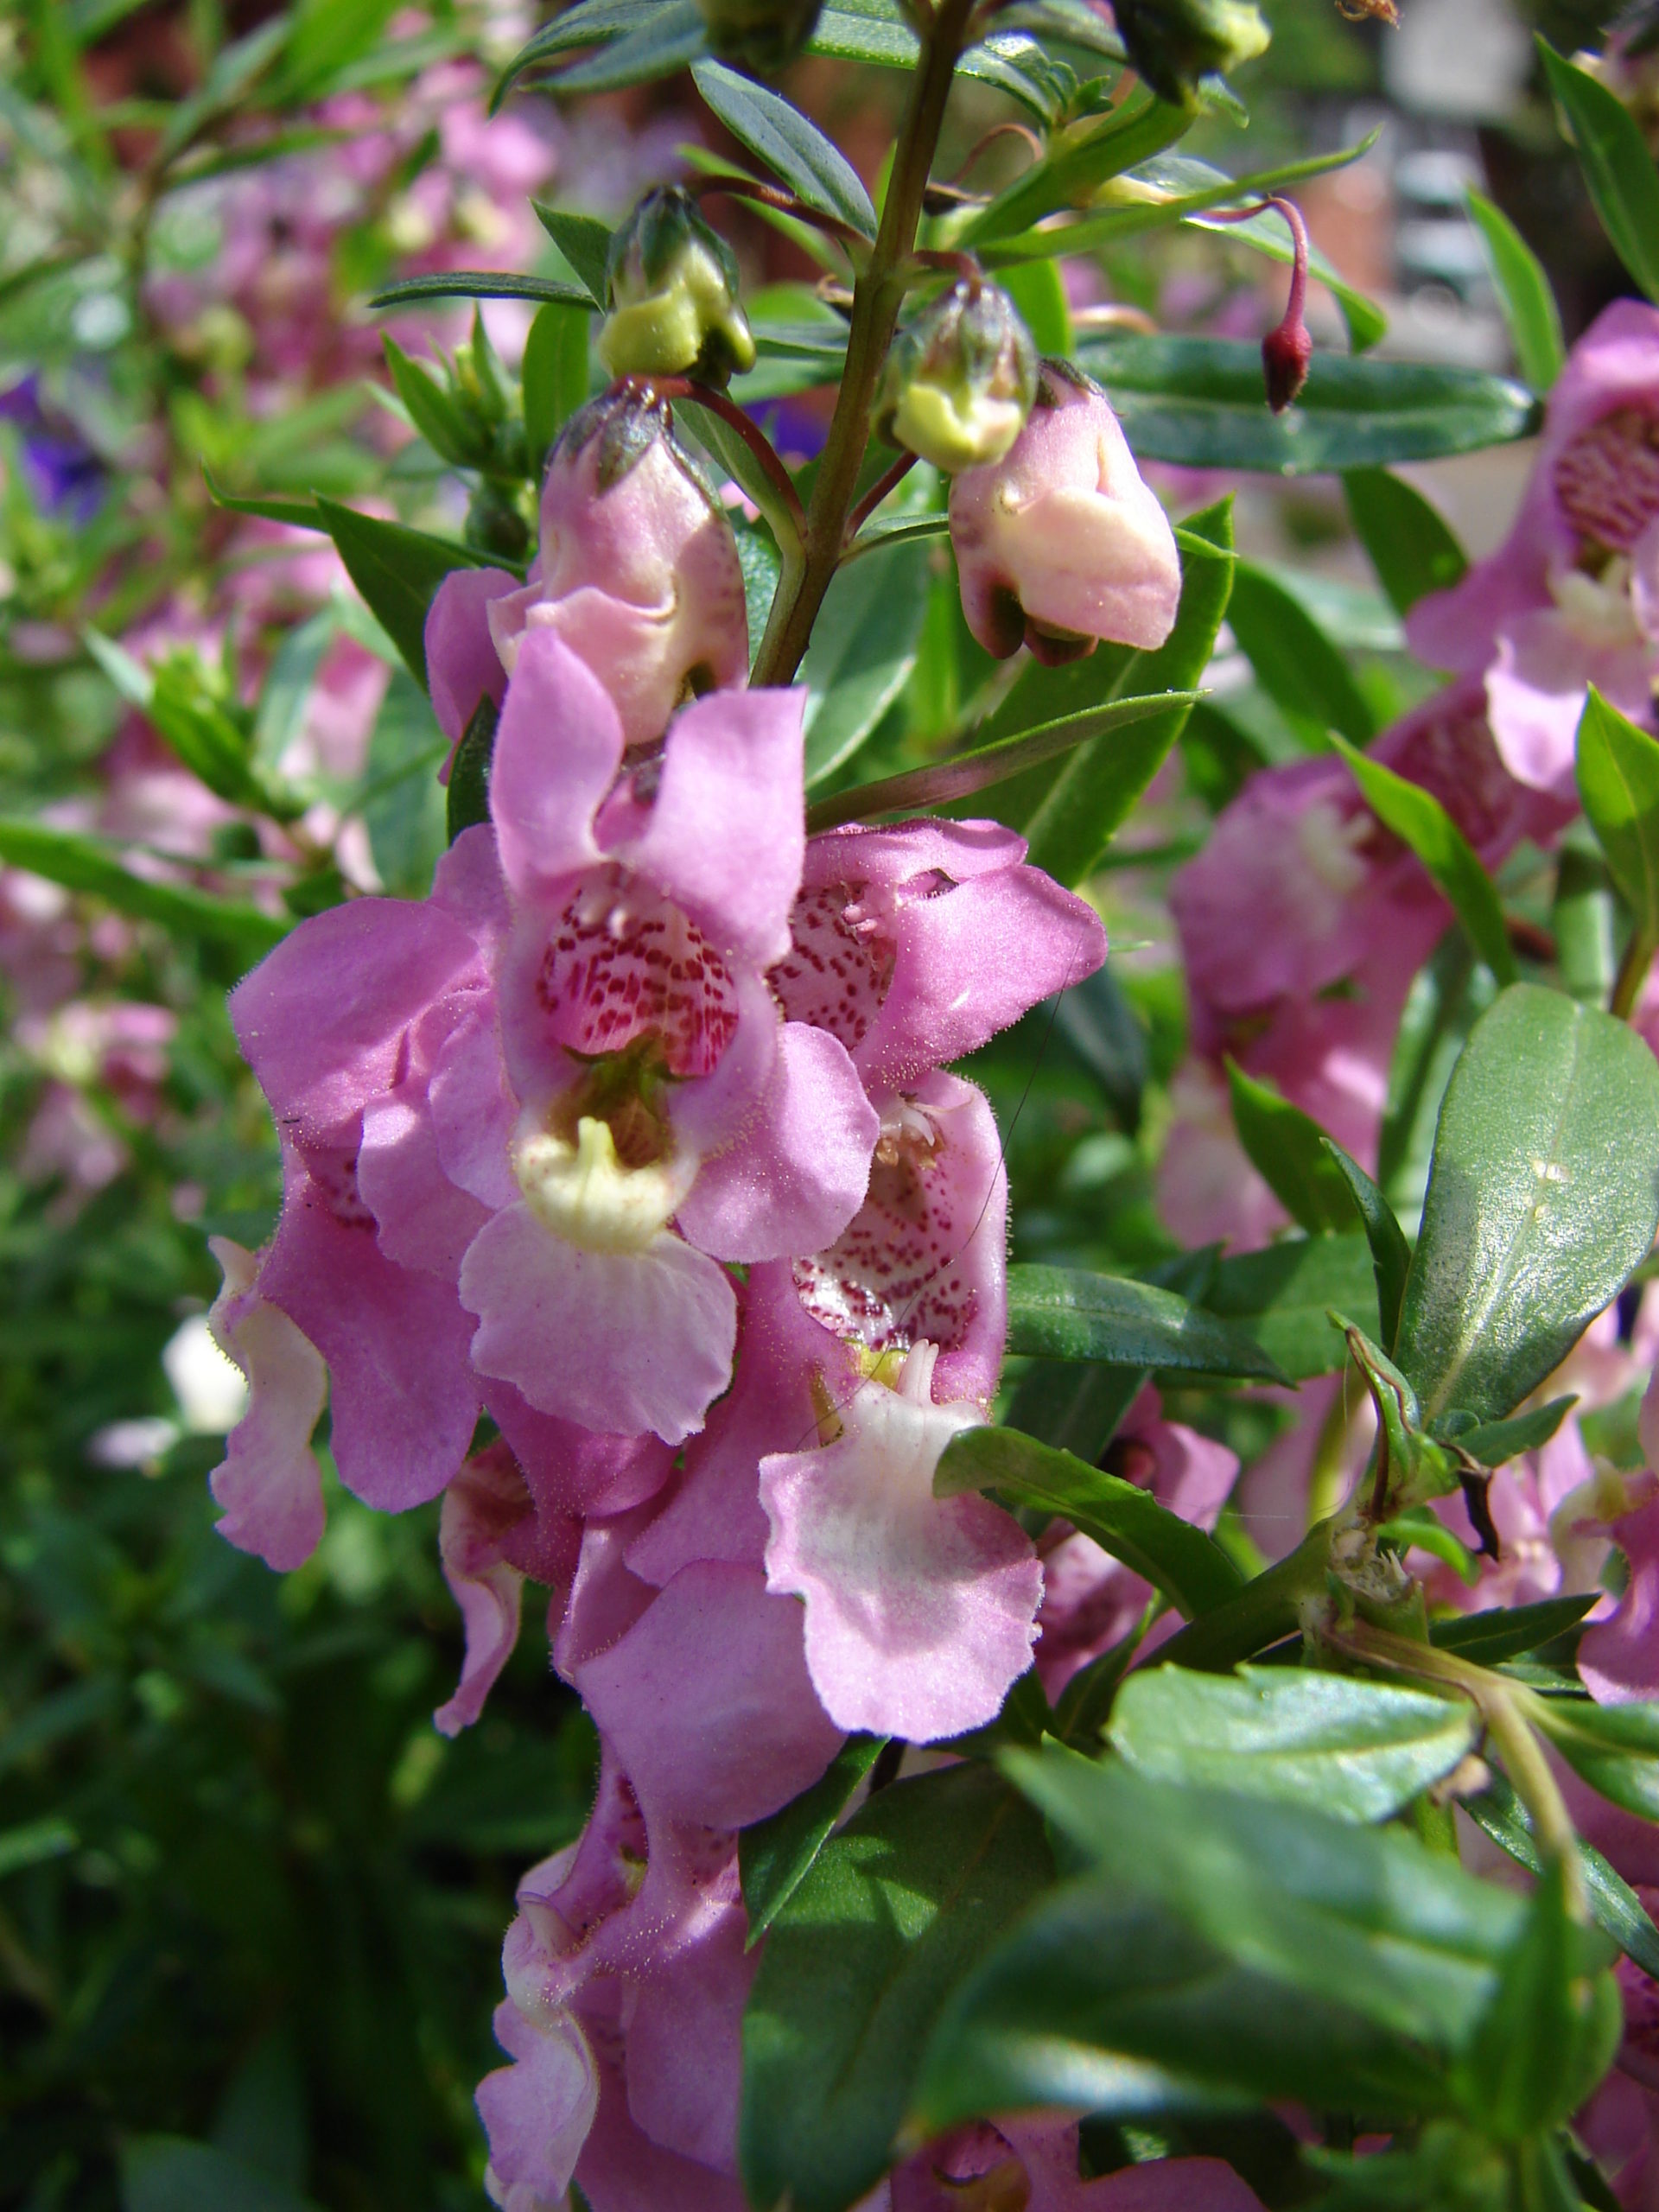 Angelonia Plant: How To Grow And Care For The Annual Beauty